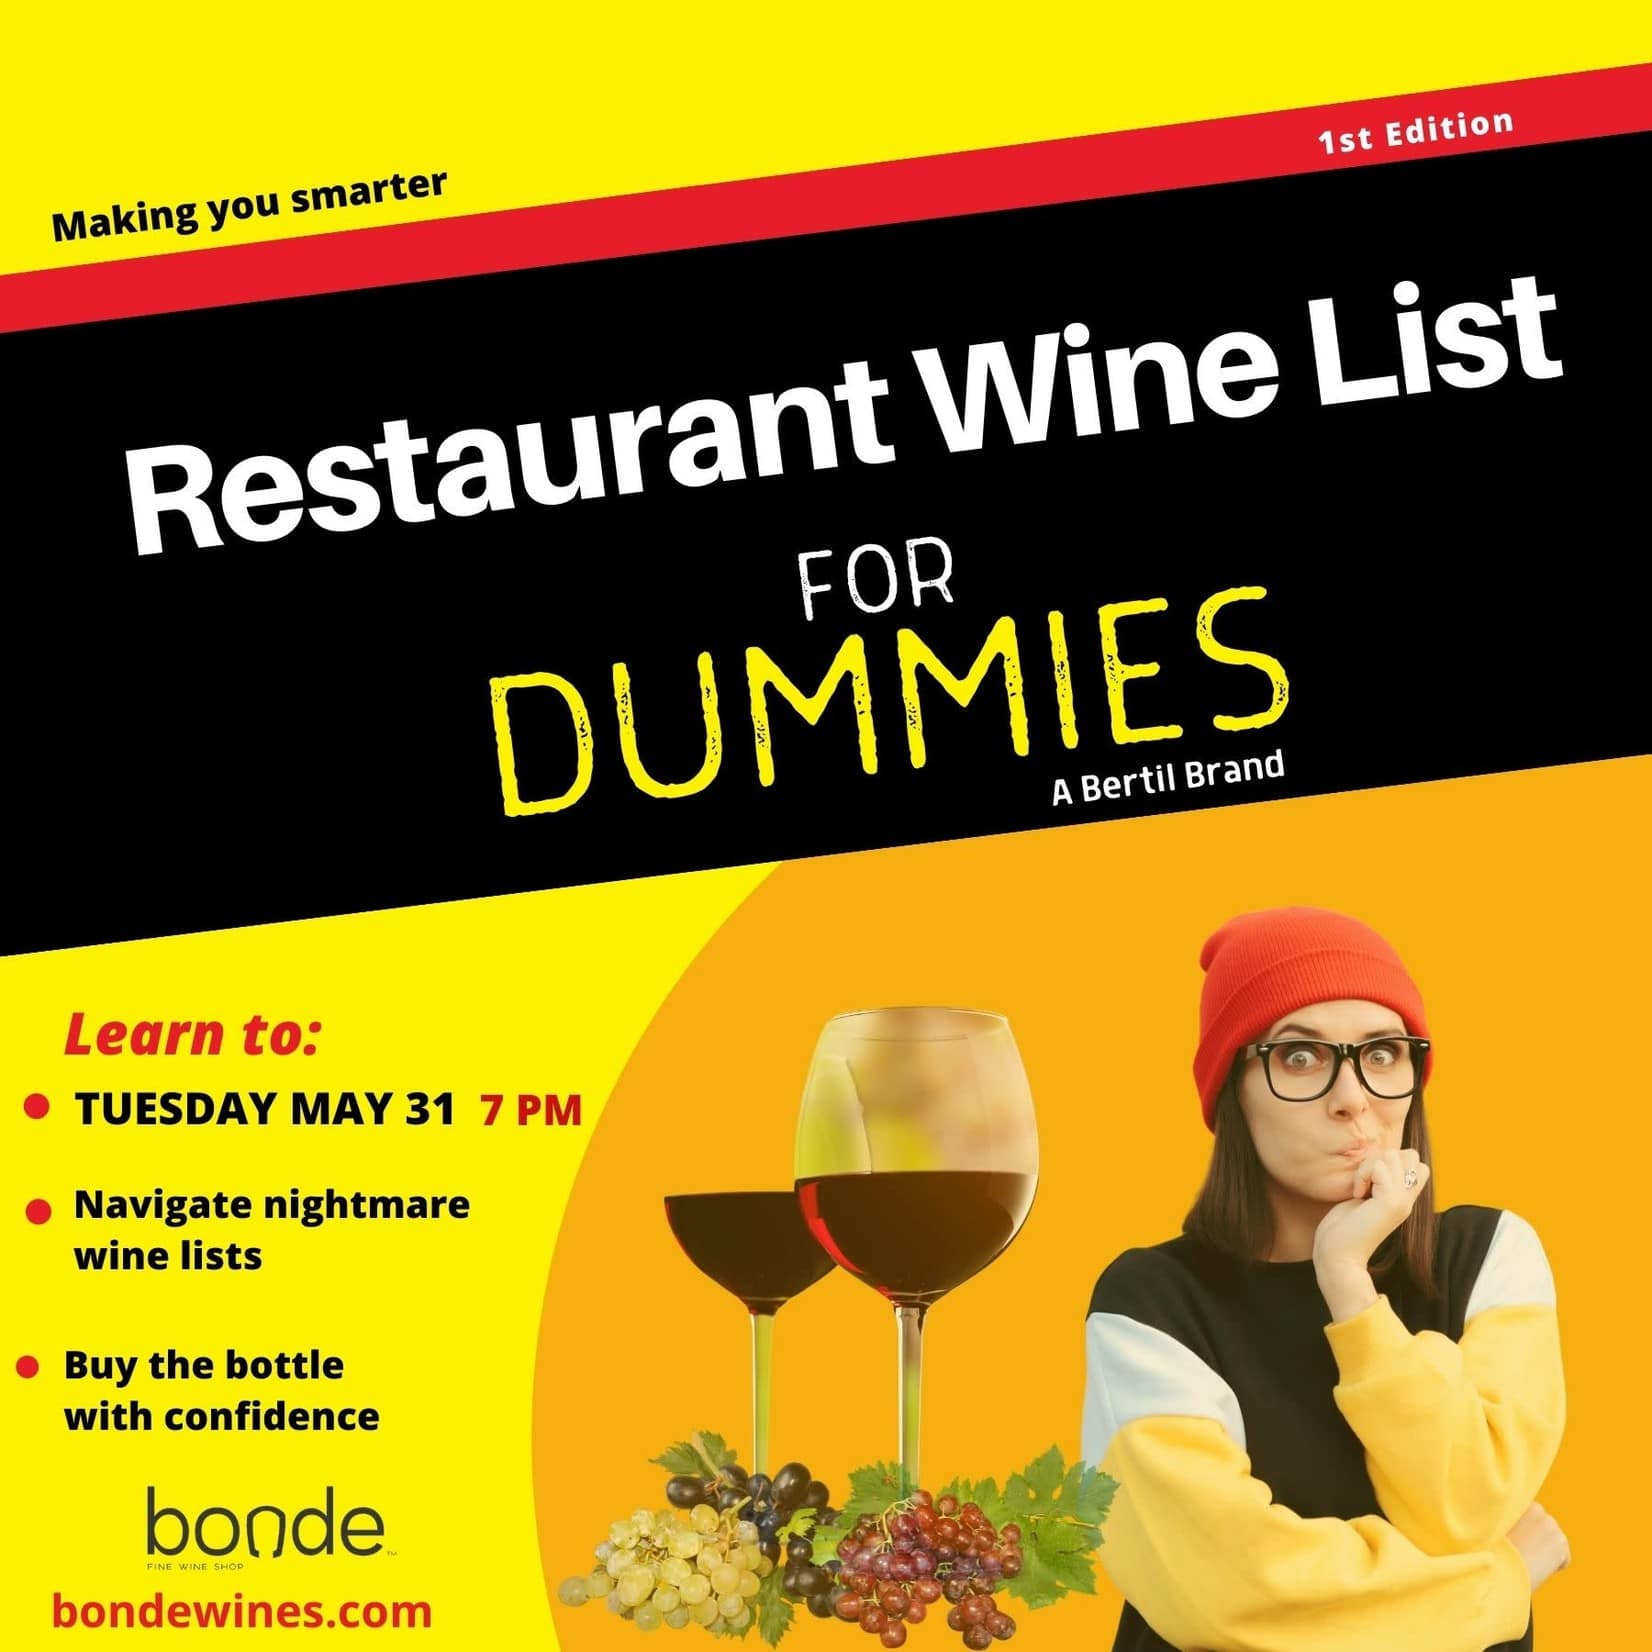 Tuesday Wine Tasting - Wine List for Dummies - May 31 - 7:00 p.m.